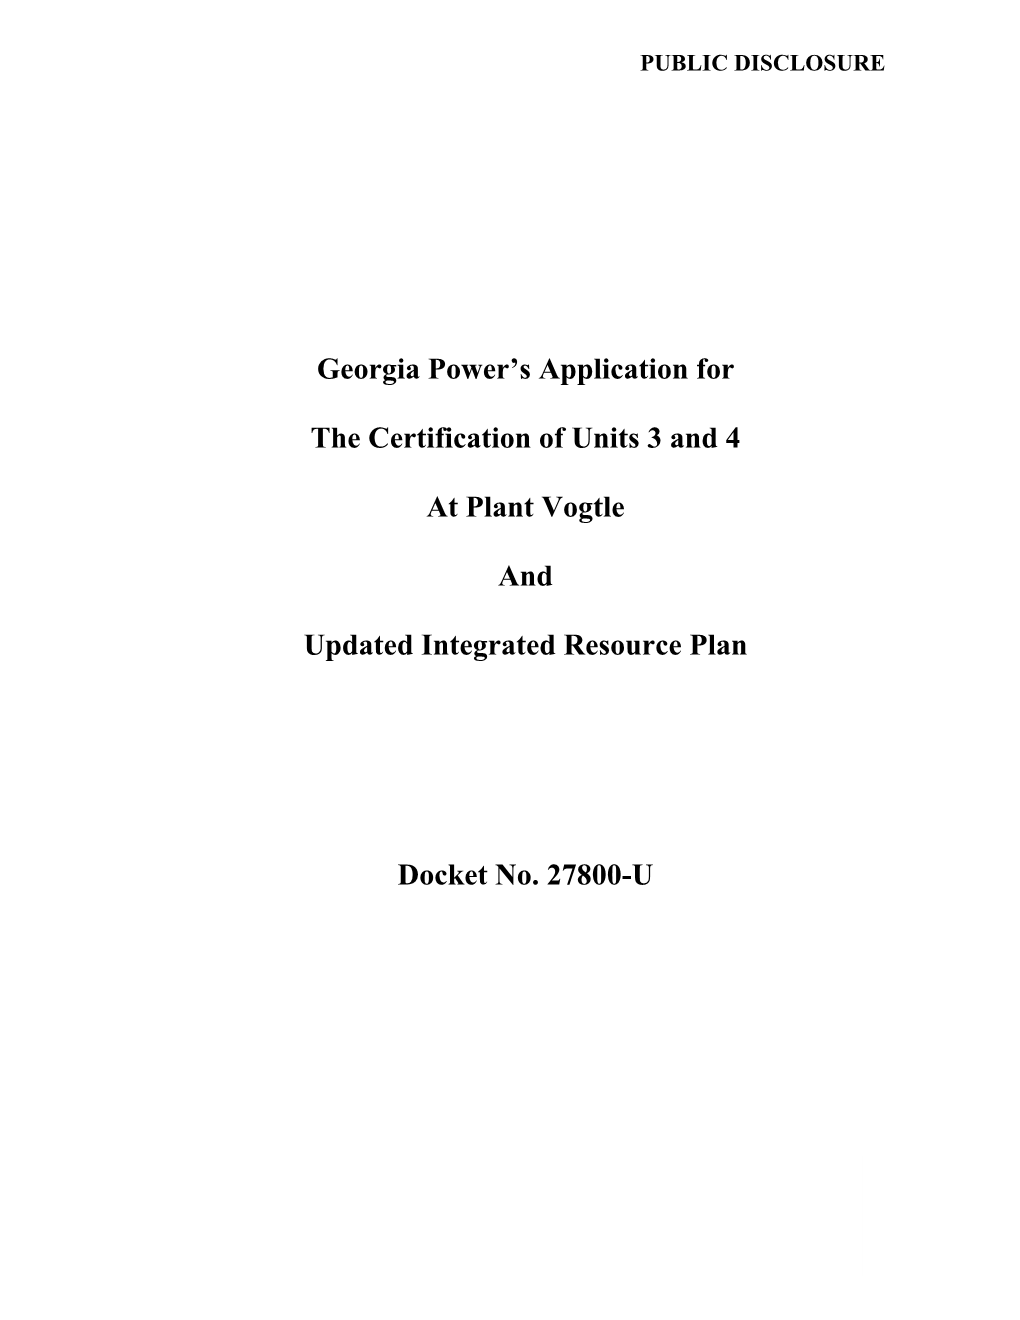 Georgia Power's Application for the Certification of Units 3 and 4 At